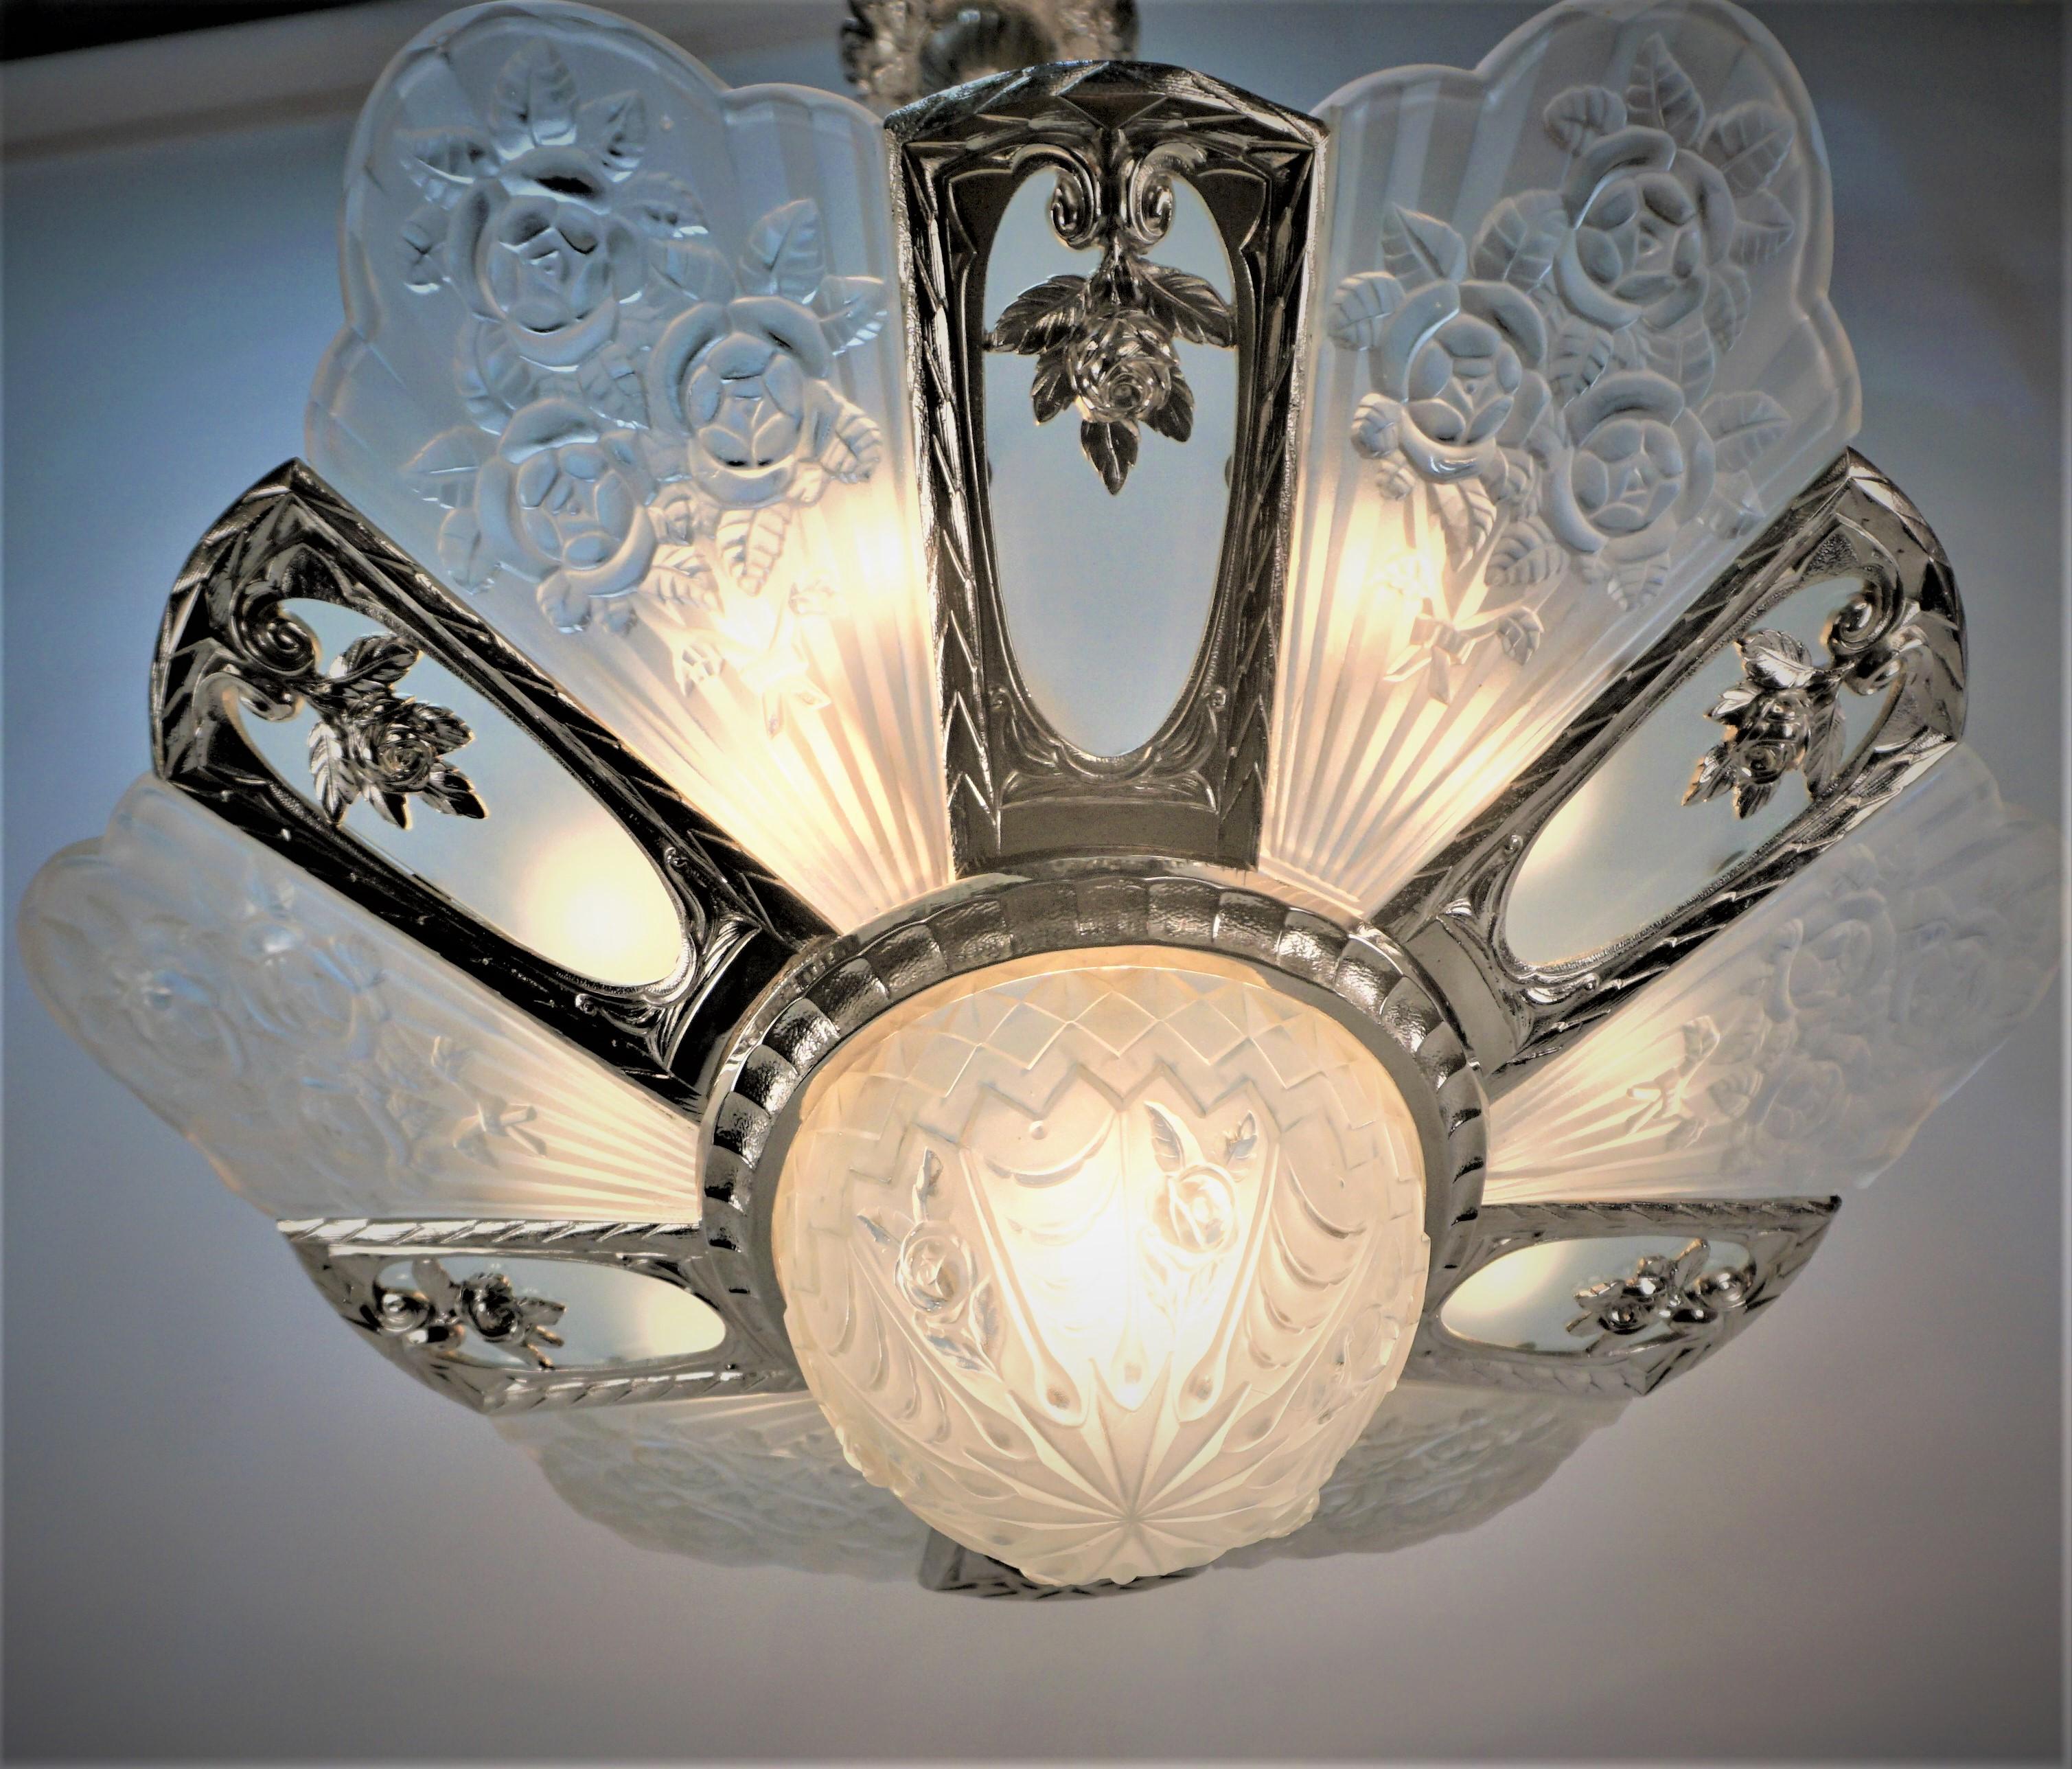 Six molded clear frosted glass with scalloped tops bearing rose with additional six flat frosted insets and a deep matching central coupe mounted in a fabulous, polished nickel over bronze Frame. 
13 lights 60 watts max each.
 